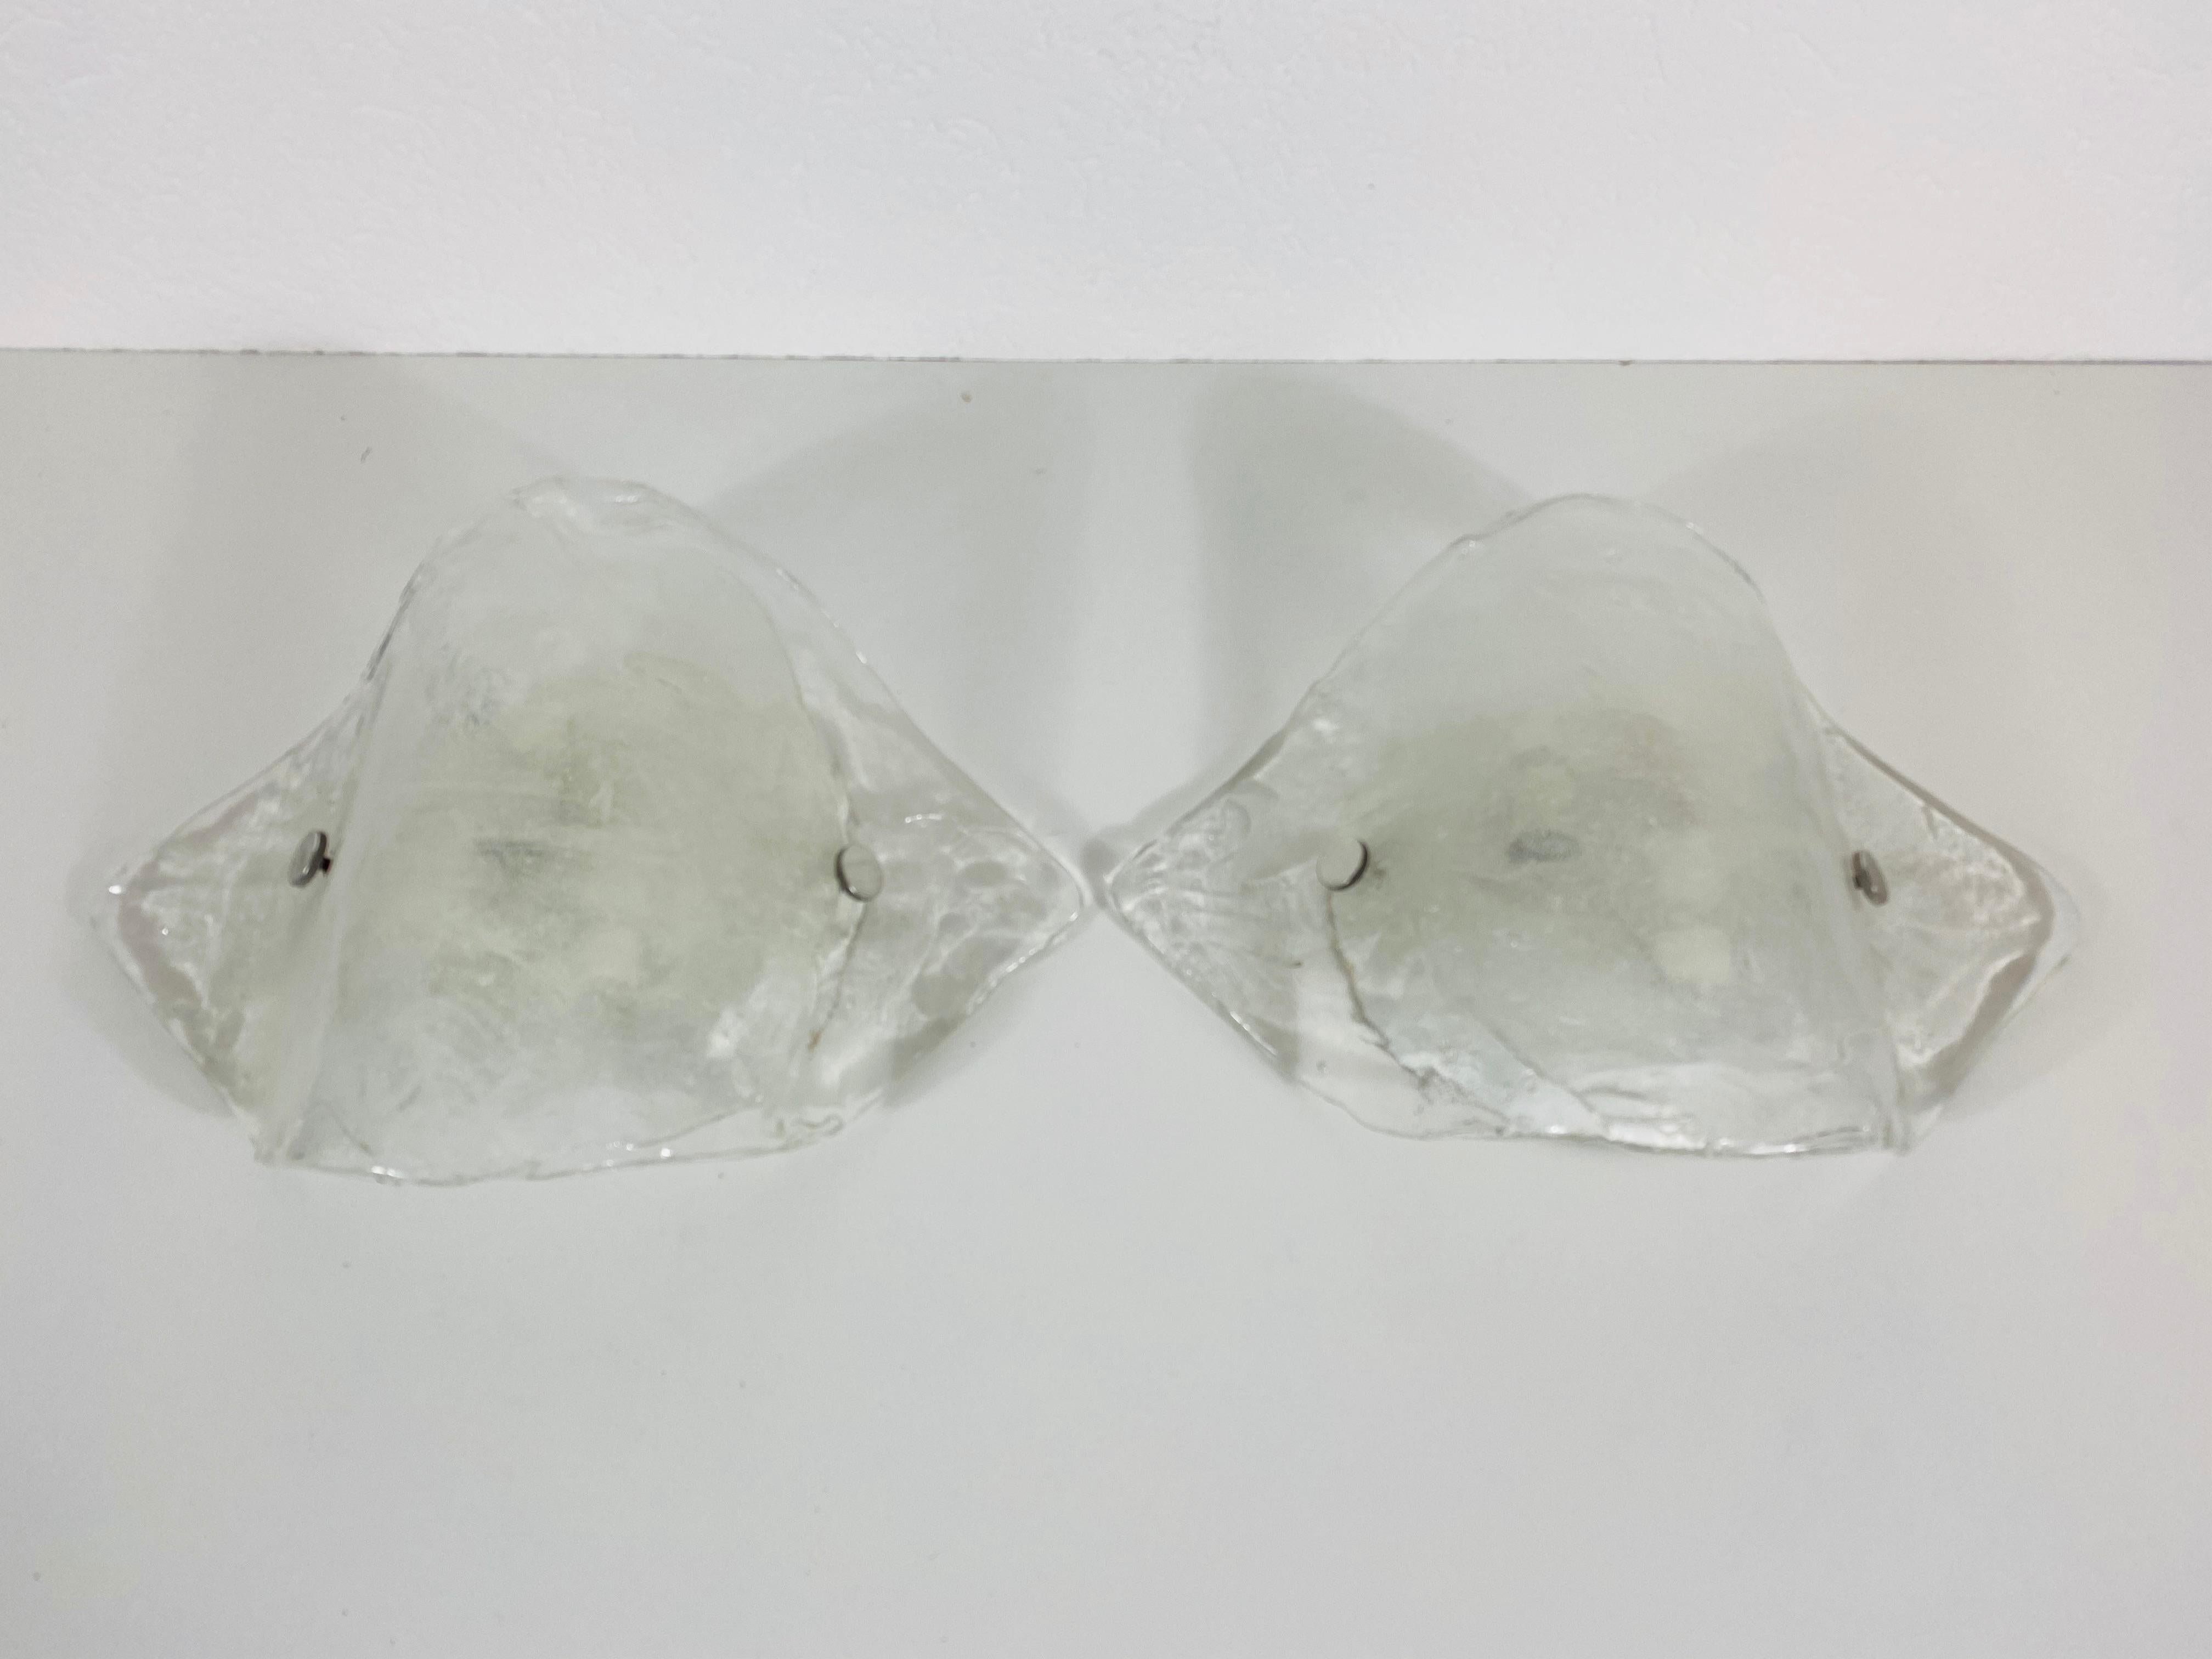 Amazing wall lamps by the Austrian brand Kalmar Franken made in the 1960s. Frosted ice glasses secure to the aluminum frame. Designed by Italian Designer Carlo Nason.

The light requires two E14 light bulbs. Very good vintage condition.

Free